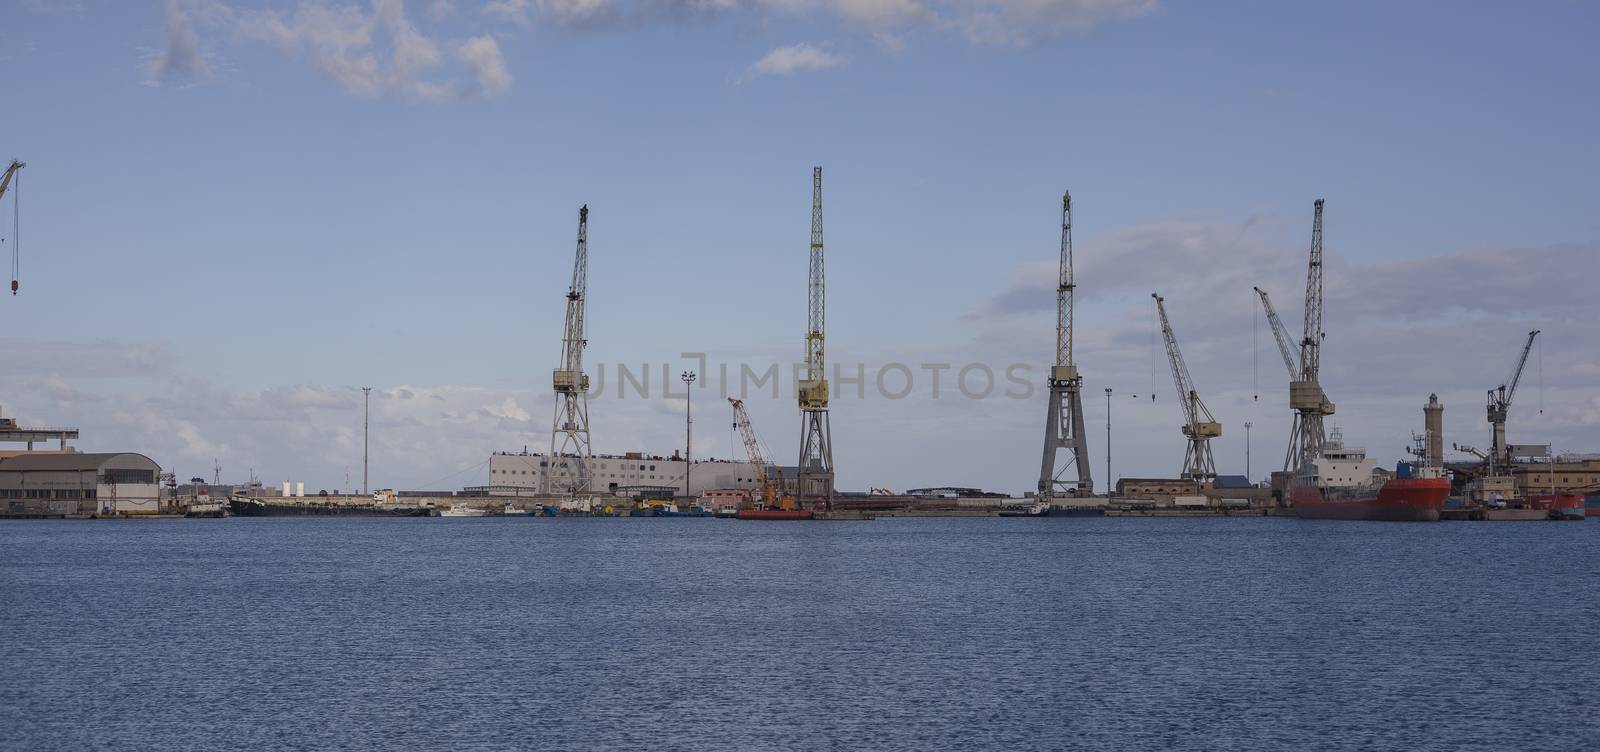 Cranes at the port 3 by pippocarlot